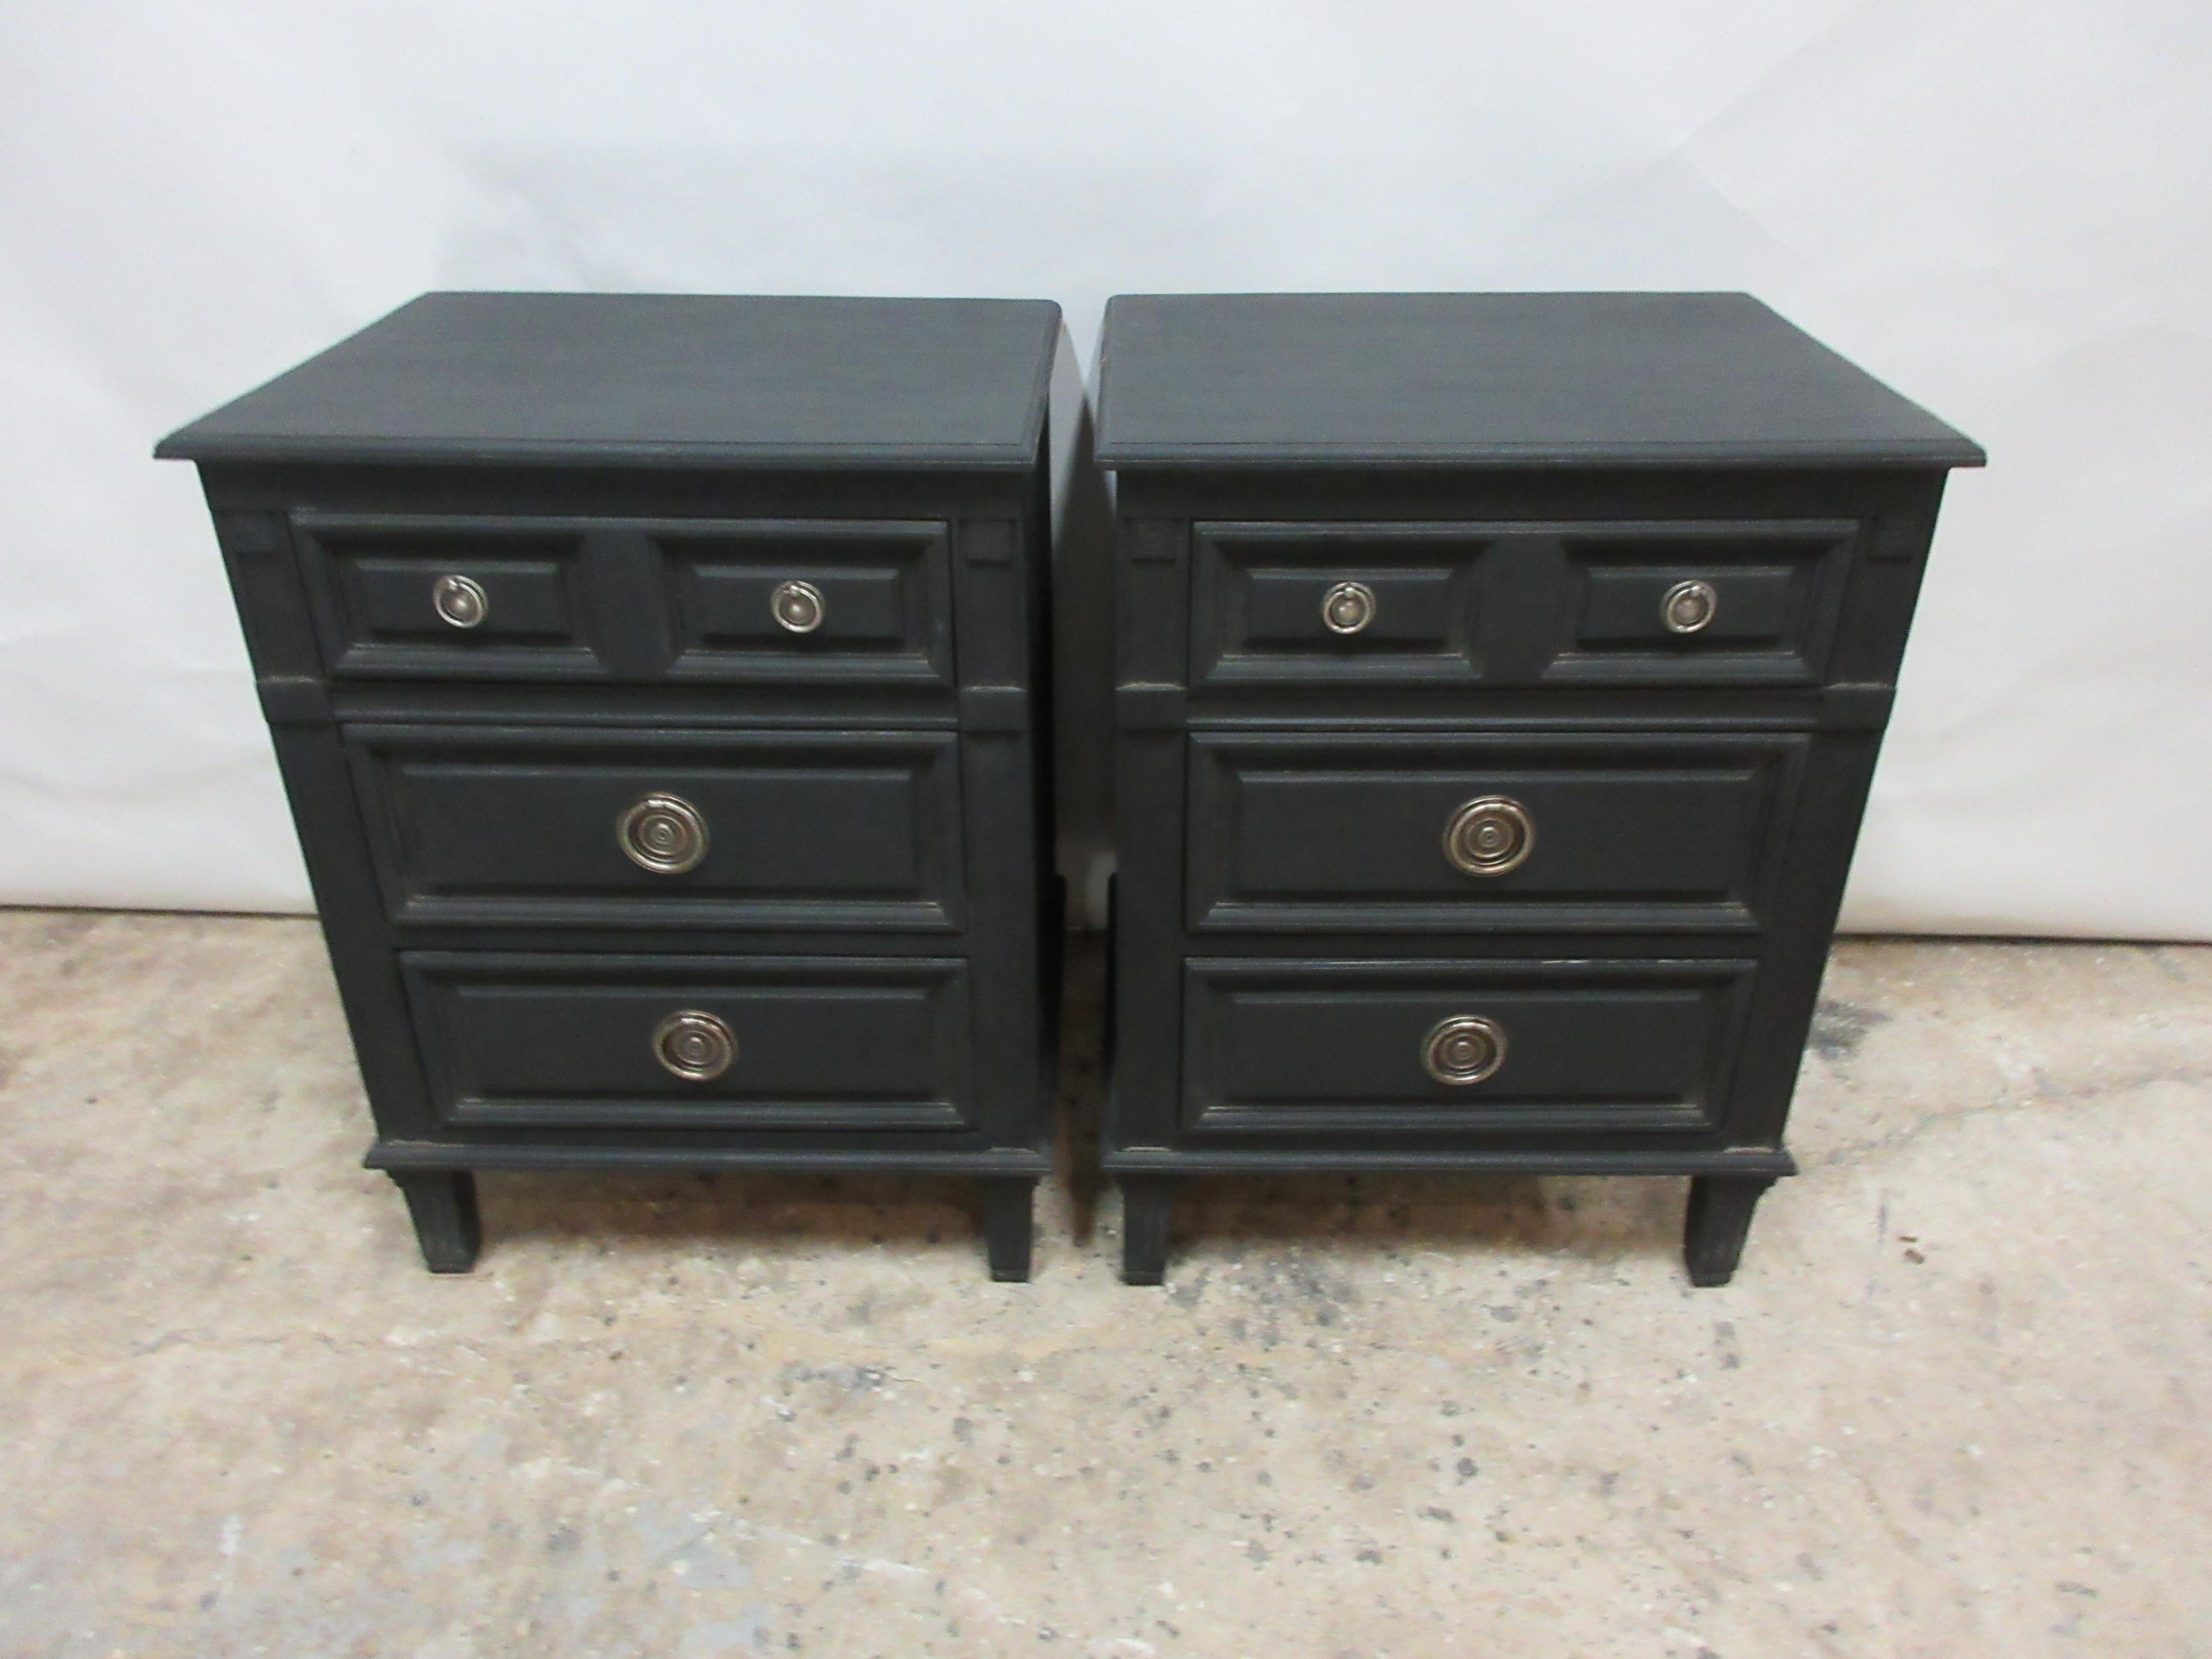 This is a set of 2 Gustavian style black nightstands. They have been restored and repainted with milk paints 